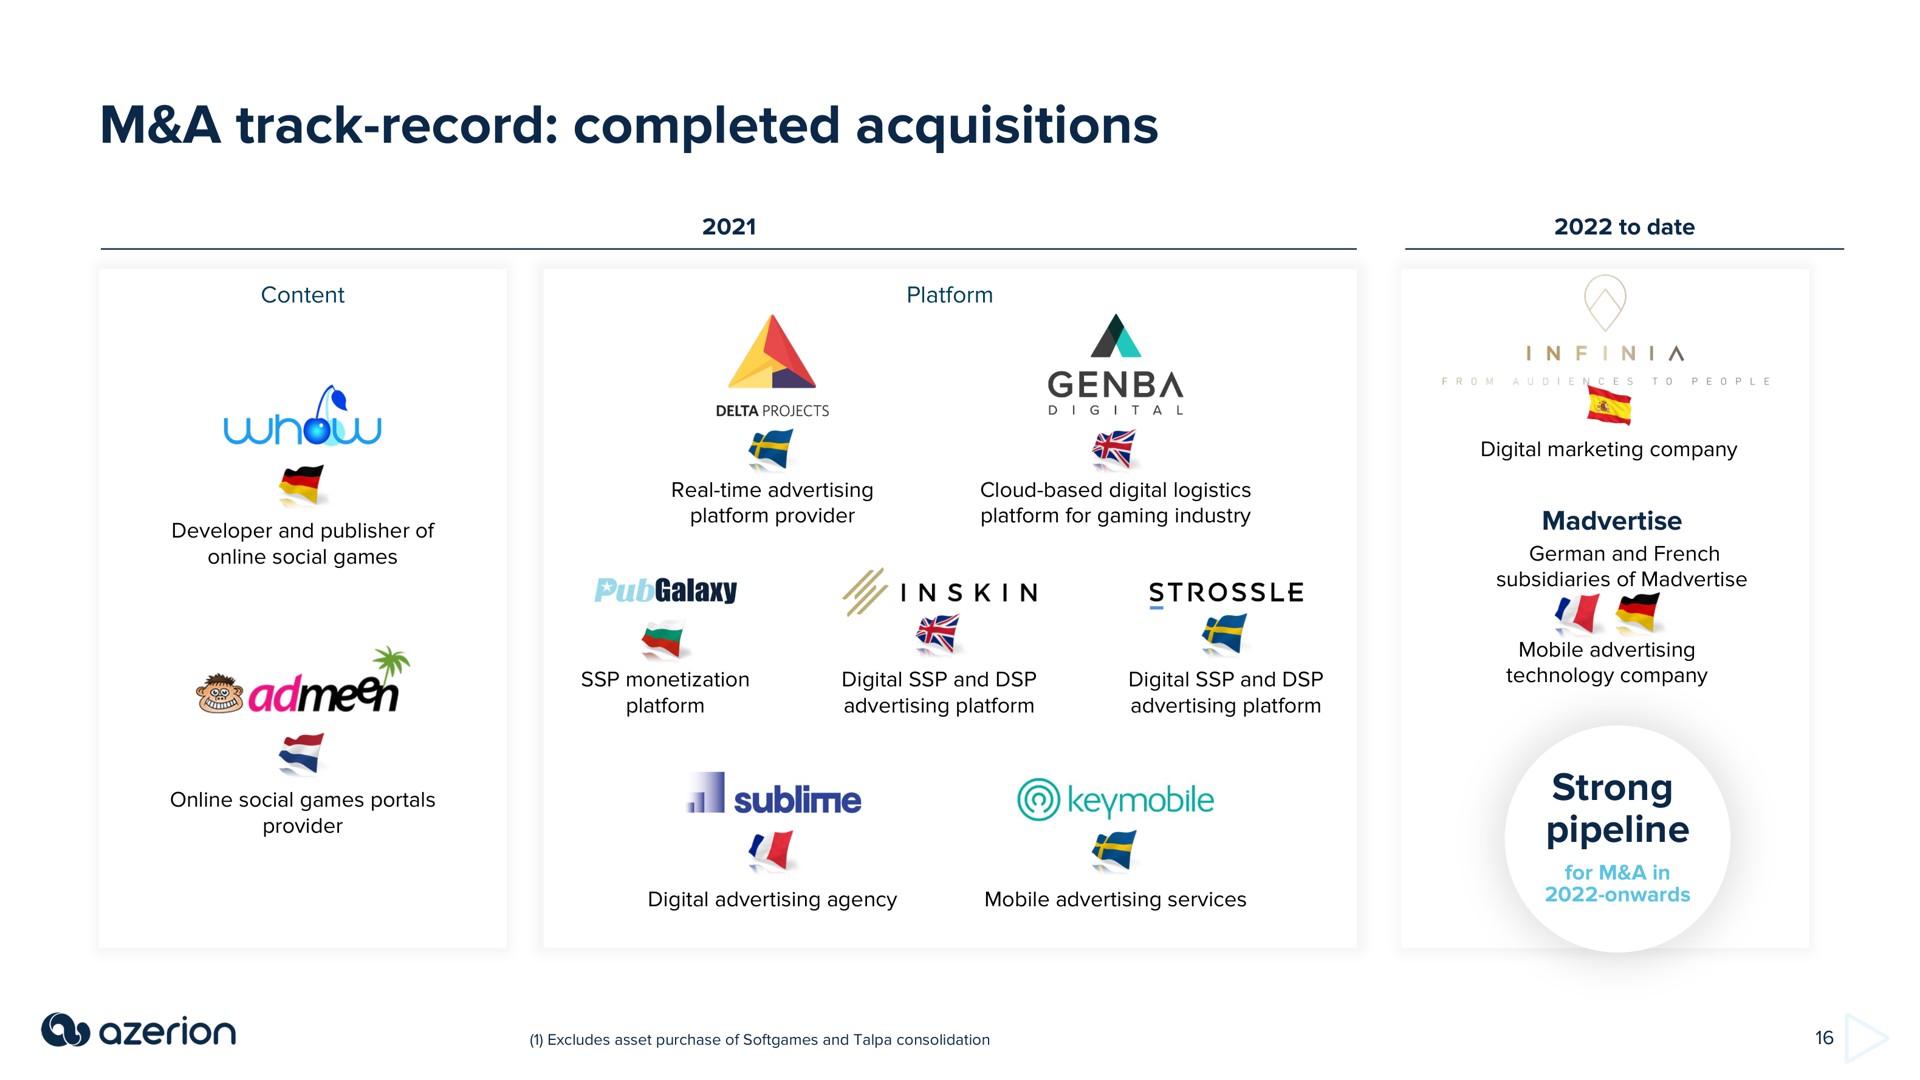 a track record completed acquisitions | Azerion